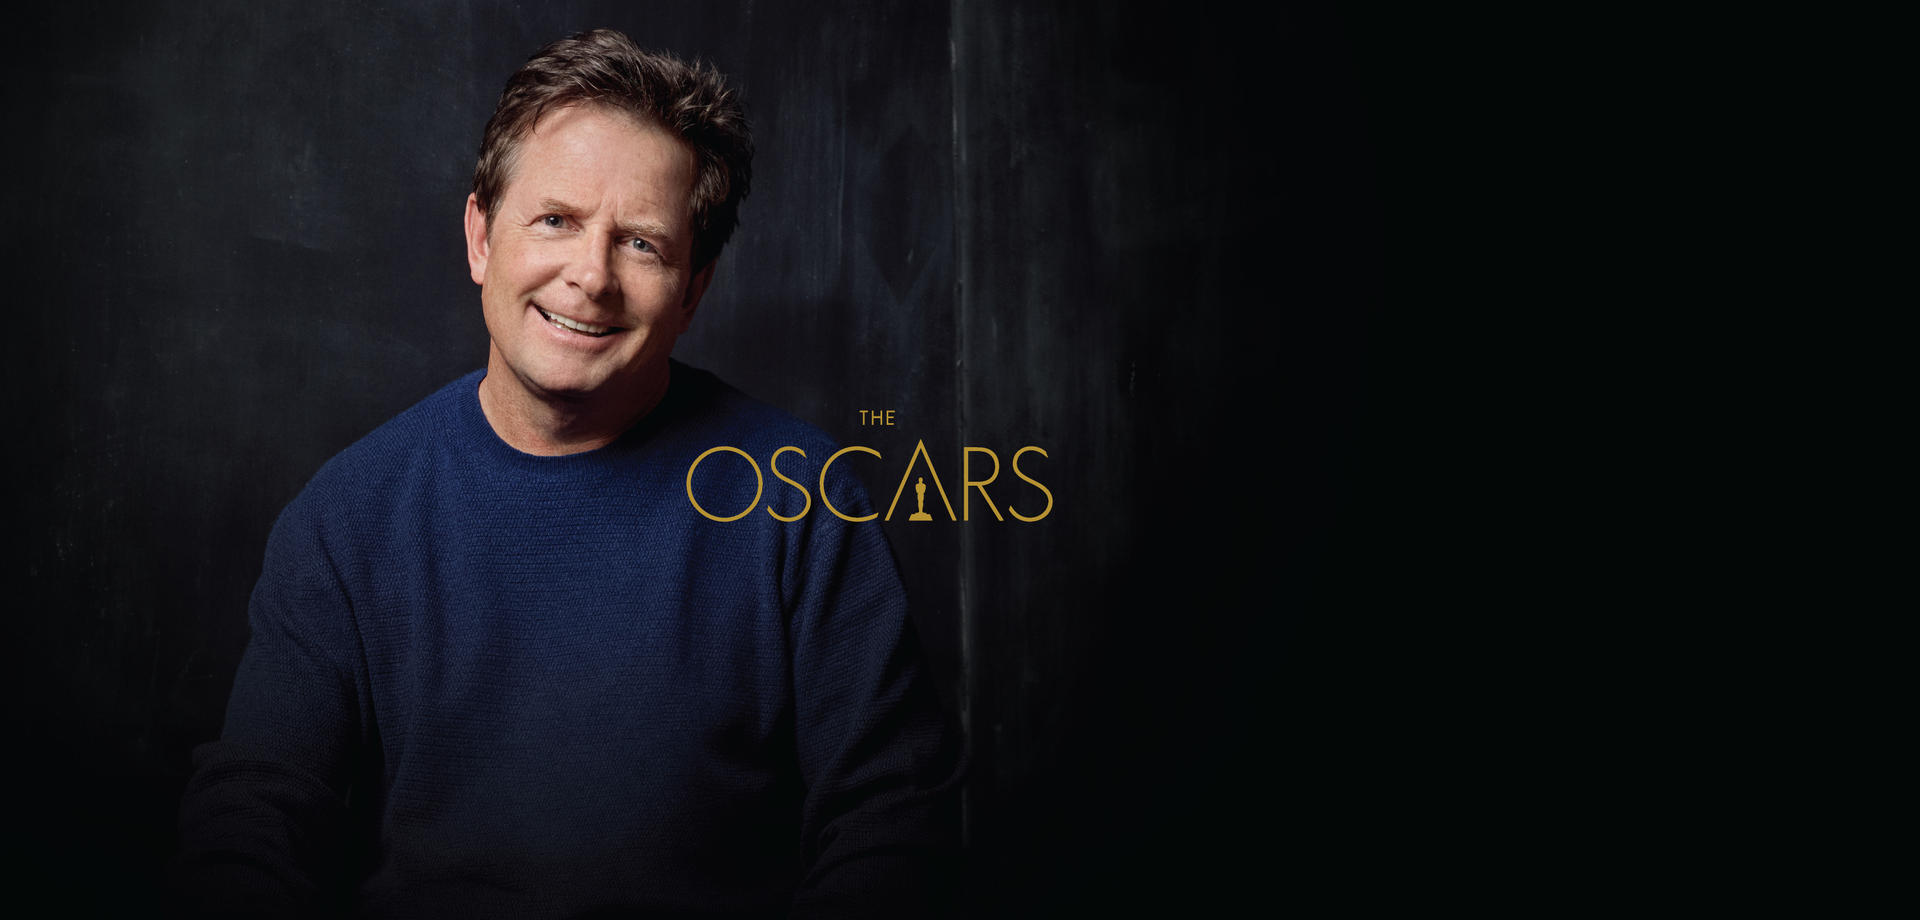 Michael J. Fox is presented with the Jean Hersholt Humanitarian Award by the Acadamy of Motion Picture Arts and Sciences